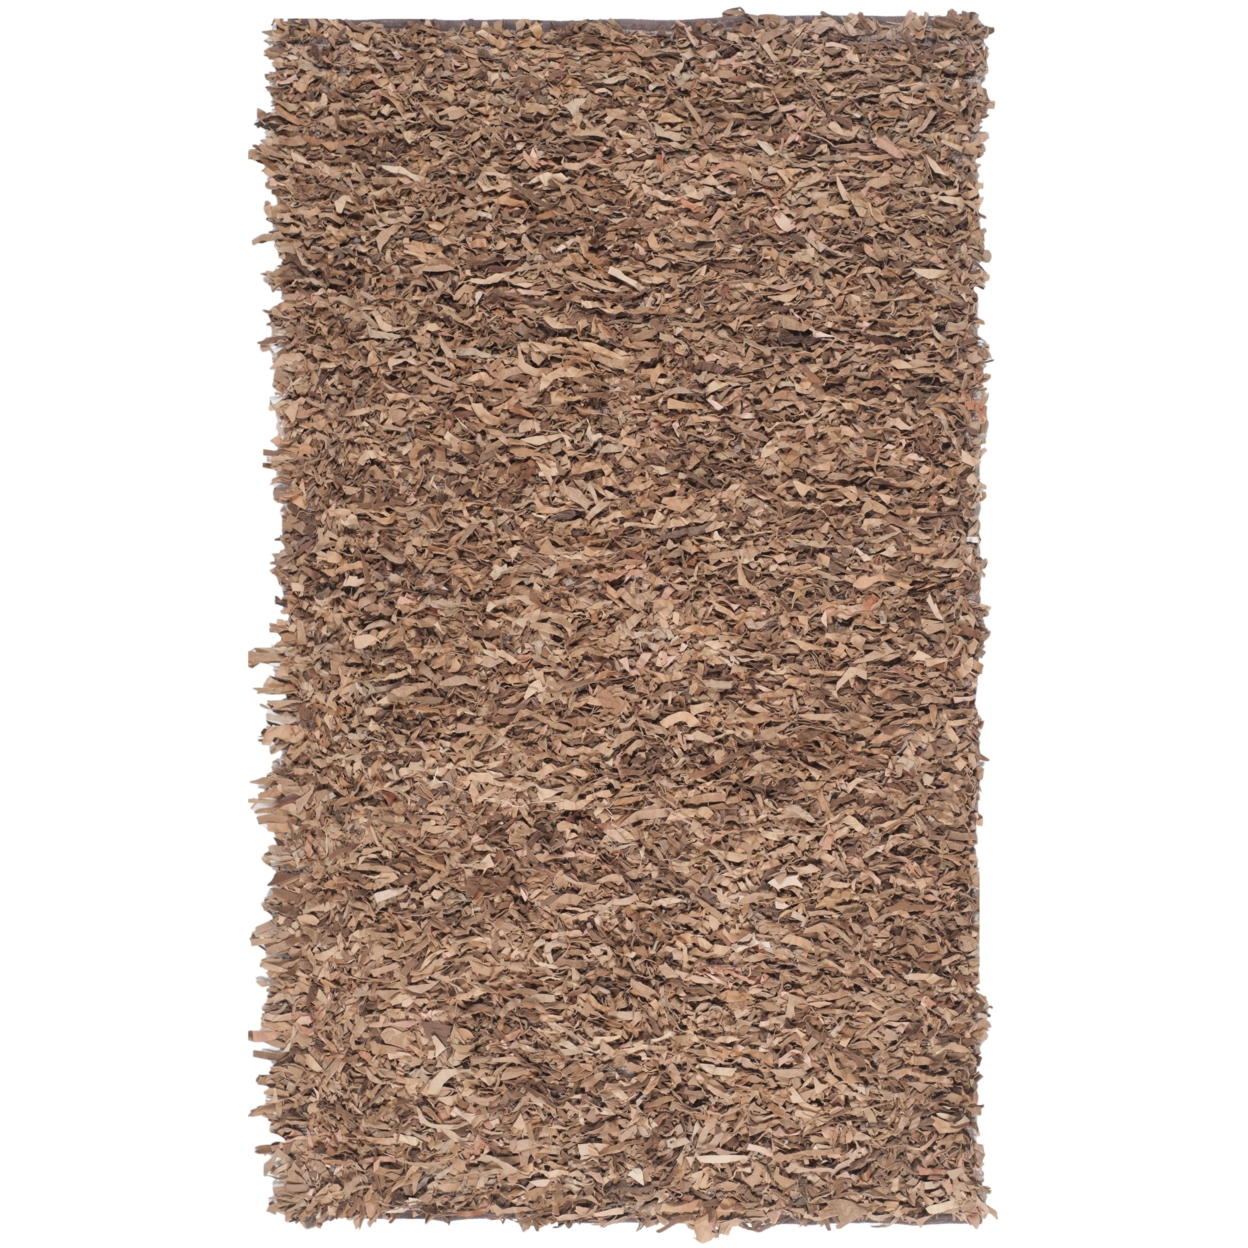 SAFAVIEH Leather Shag LSG511K Hand-knotted Brown Rug - 8' X 10'